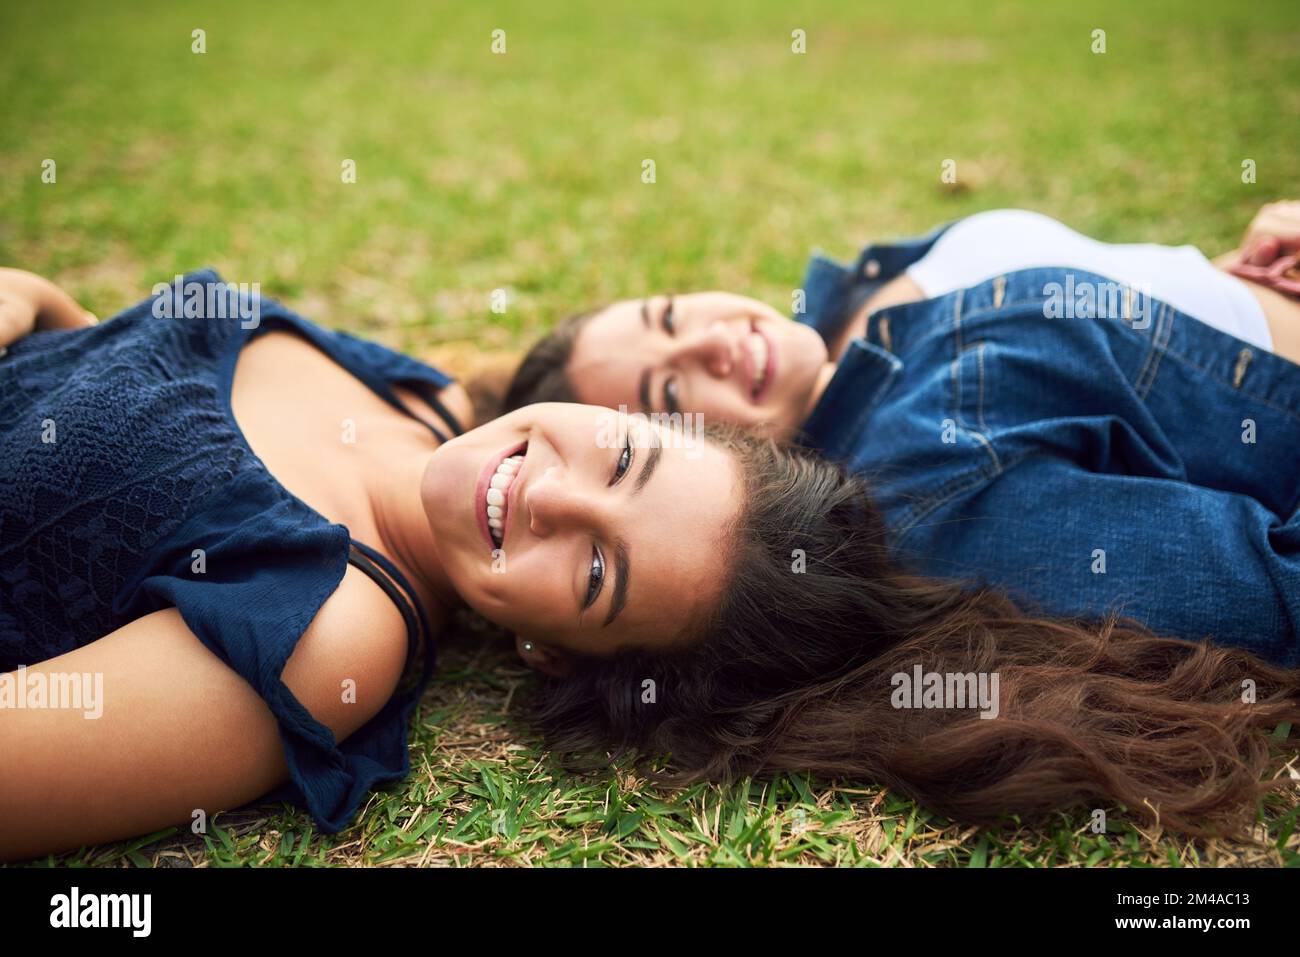 Our friendship is forever. two female best friends lying on the grass in a public park. Stock Photo